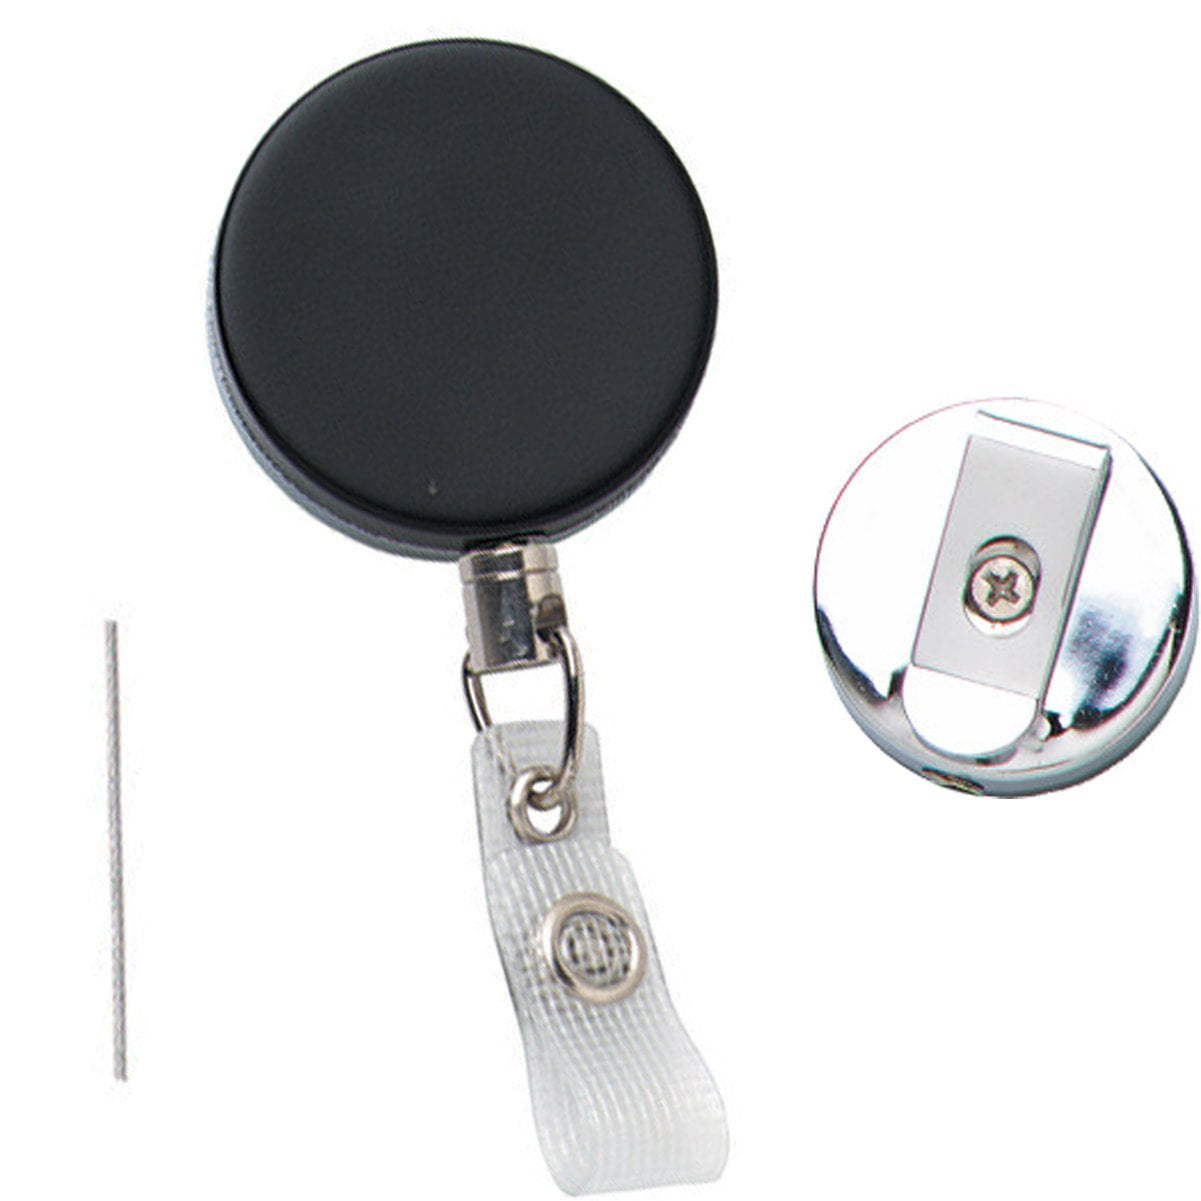 Bulk 25 Pack - Heavy Duty Badge Reel with Metal Cord and Belt Clip - All  Metal Retractable I'd, Key Holder with Steel Wire Cable - Black & Chrome  Finish by Specialist ID (Black/Silver) 